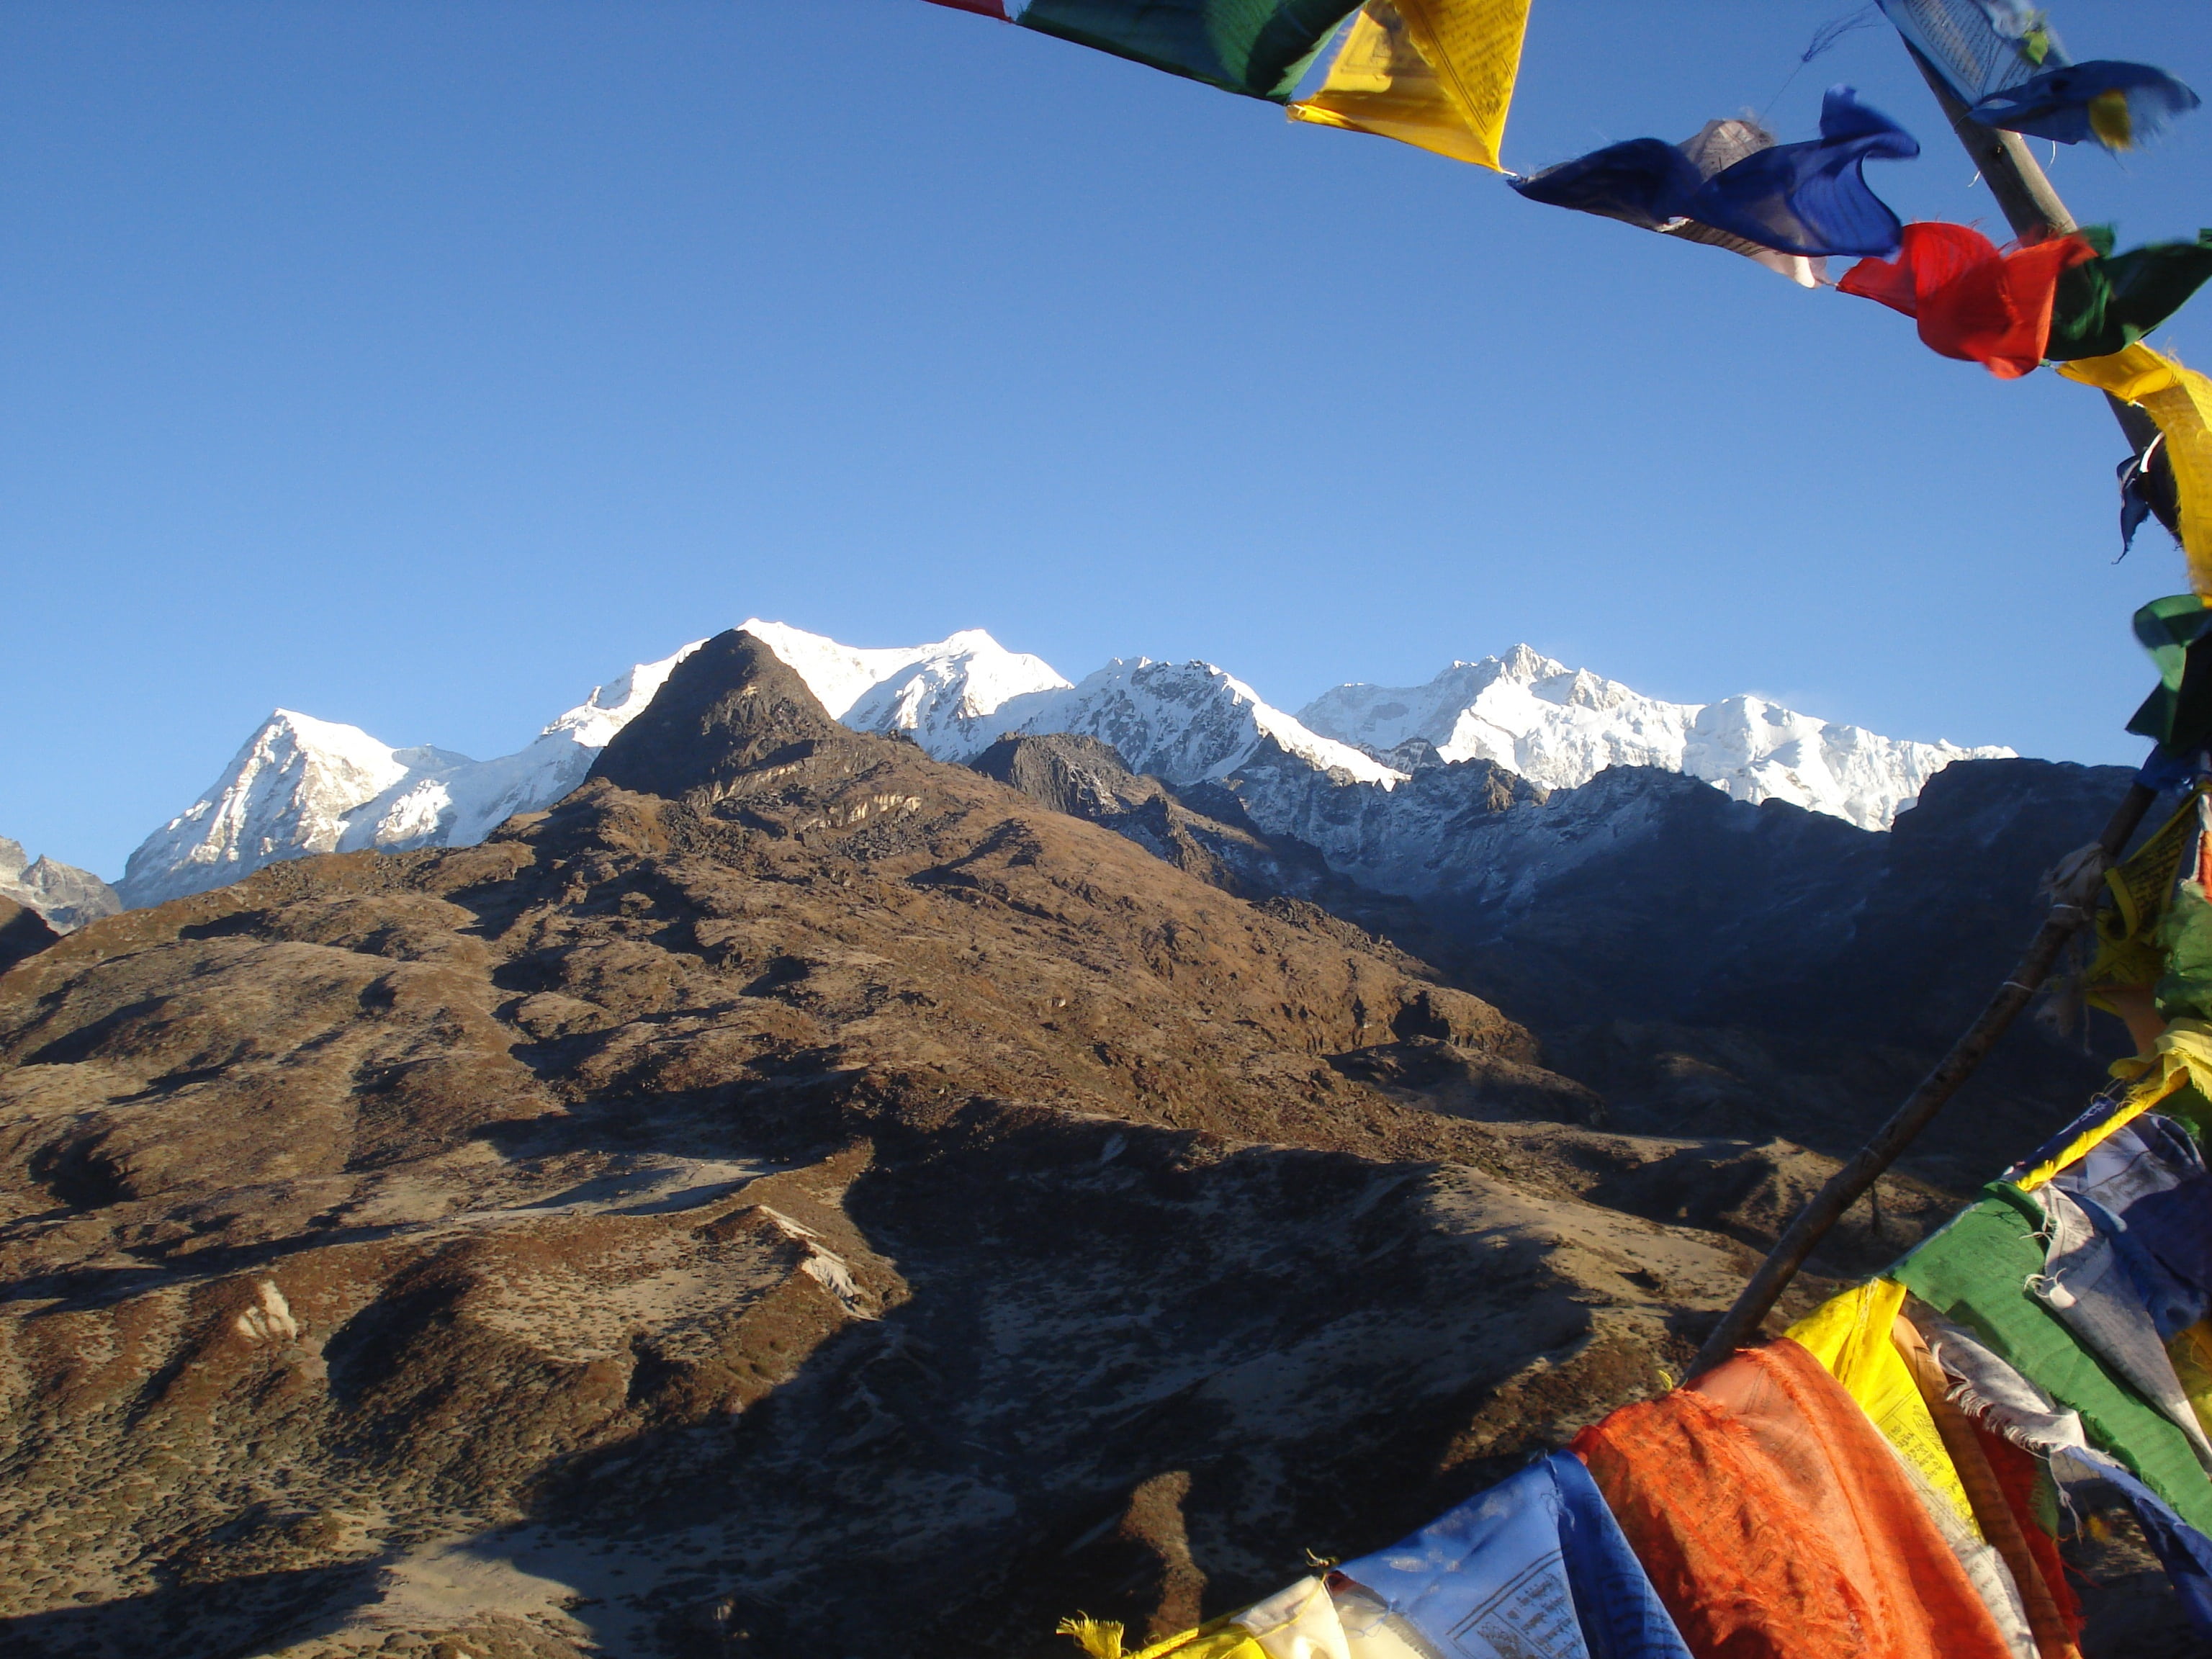 mountains under clear day sky, sikkim, flags, landscape, high mountain